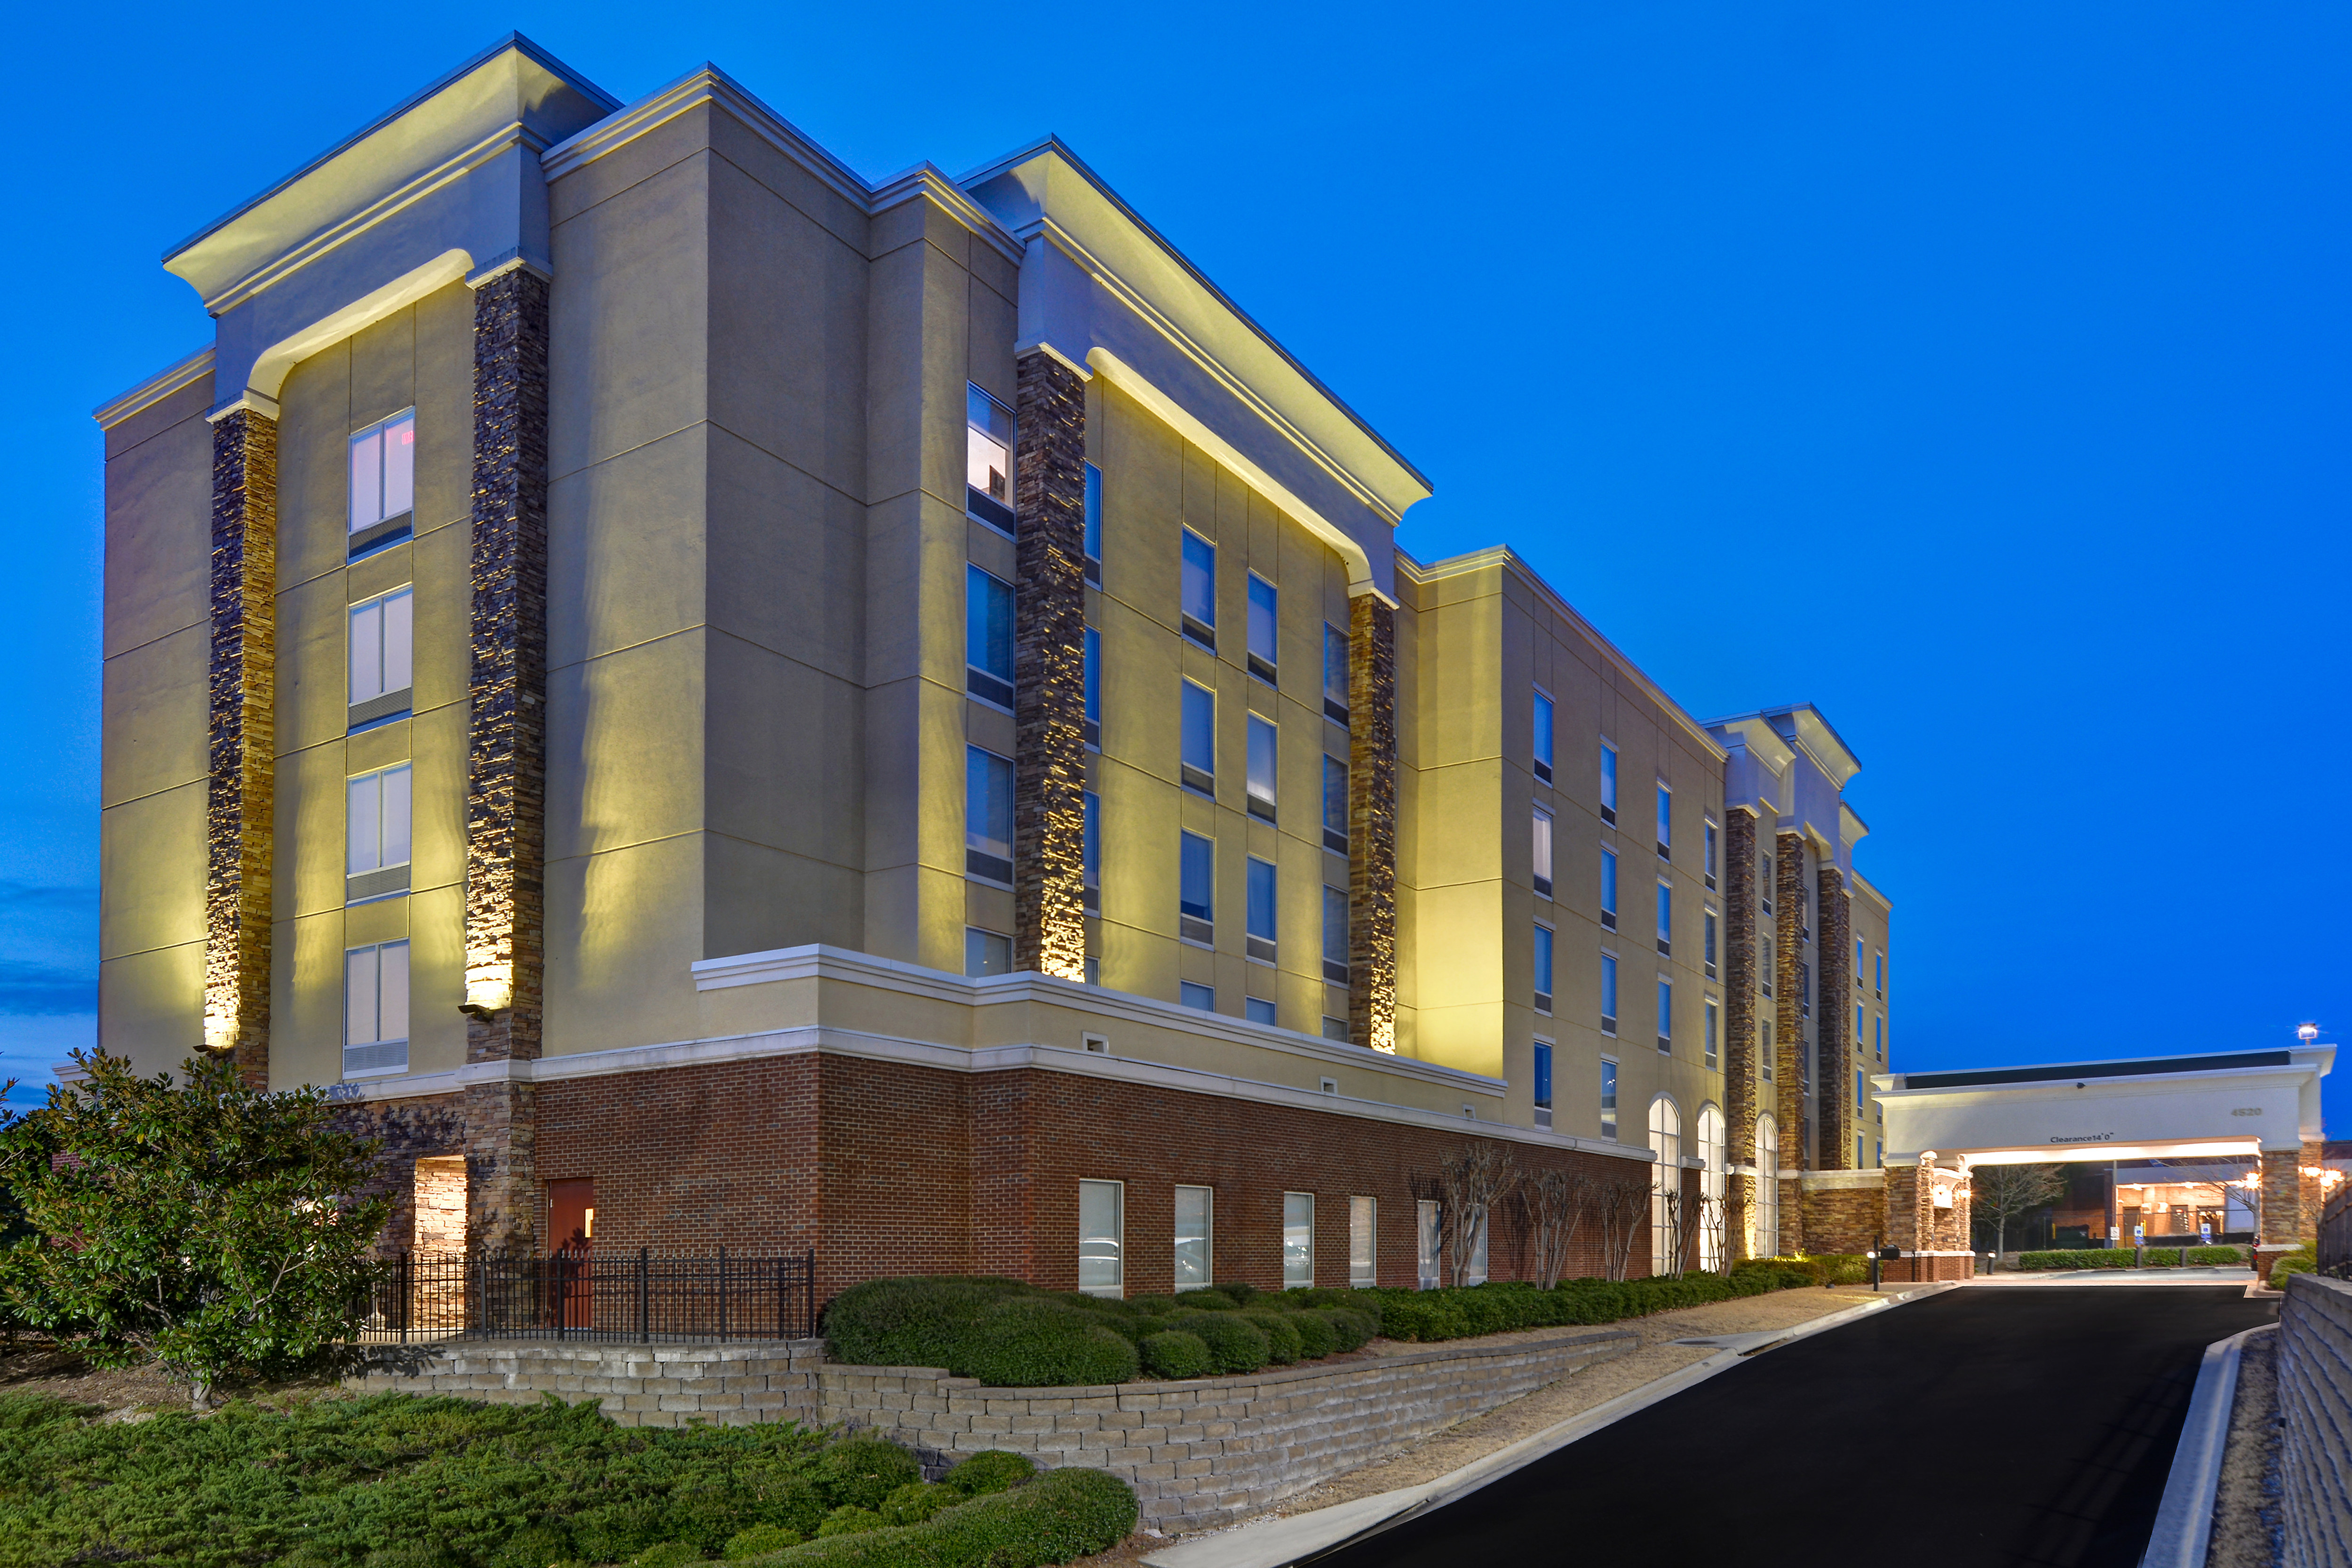 Hampton Inn and Suites Hotel Exterior in the Evening